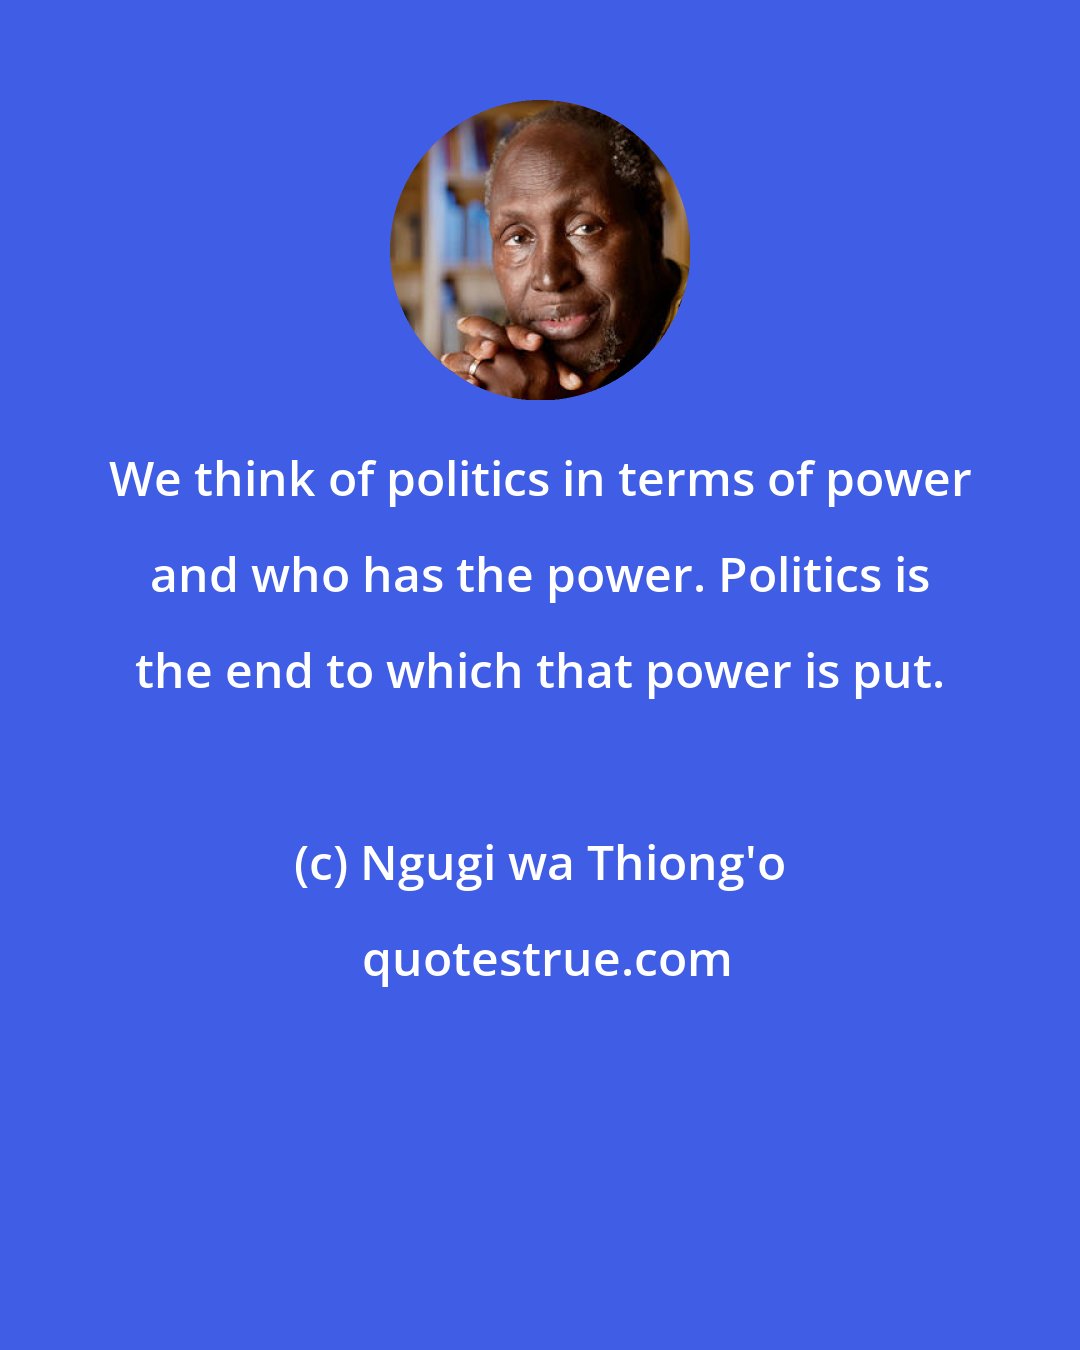 Ngugi wa Thiong'o: We think of politics in terms of power and who has the power. Politics is the end to which that power is put.